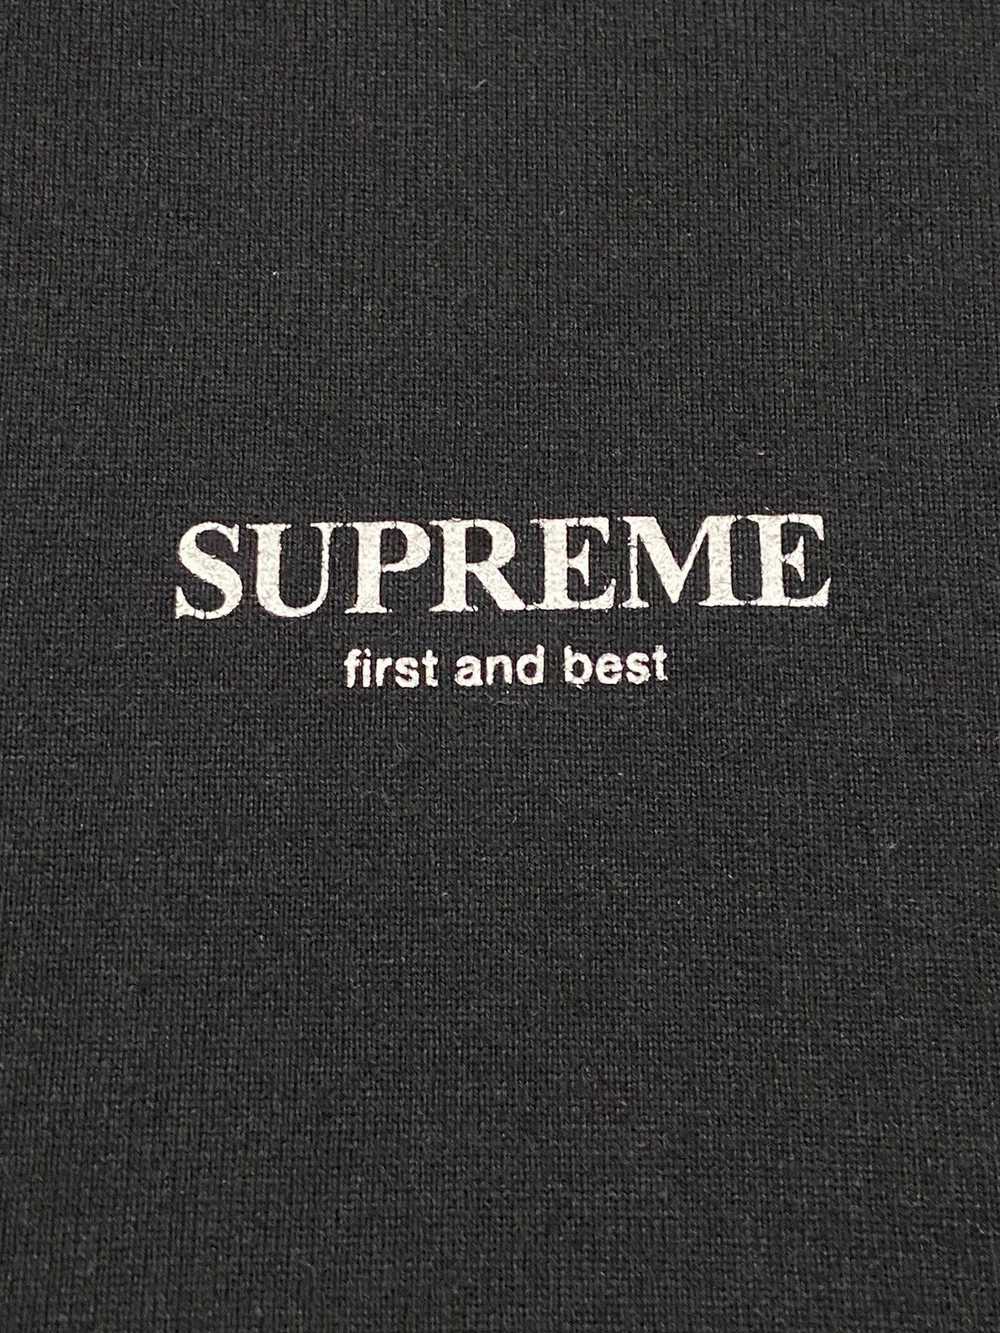 Supreme FW18 First and Best Tee - image 5